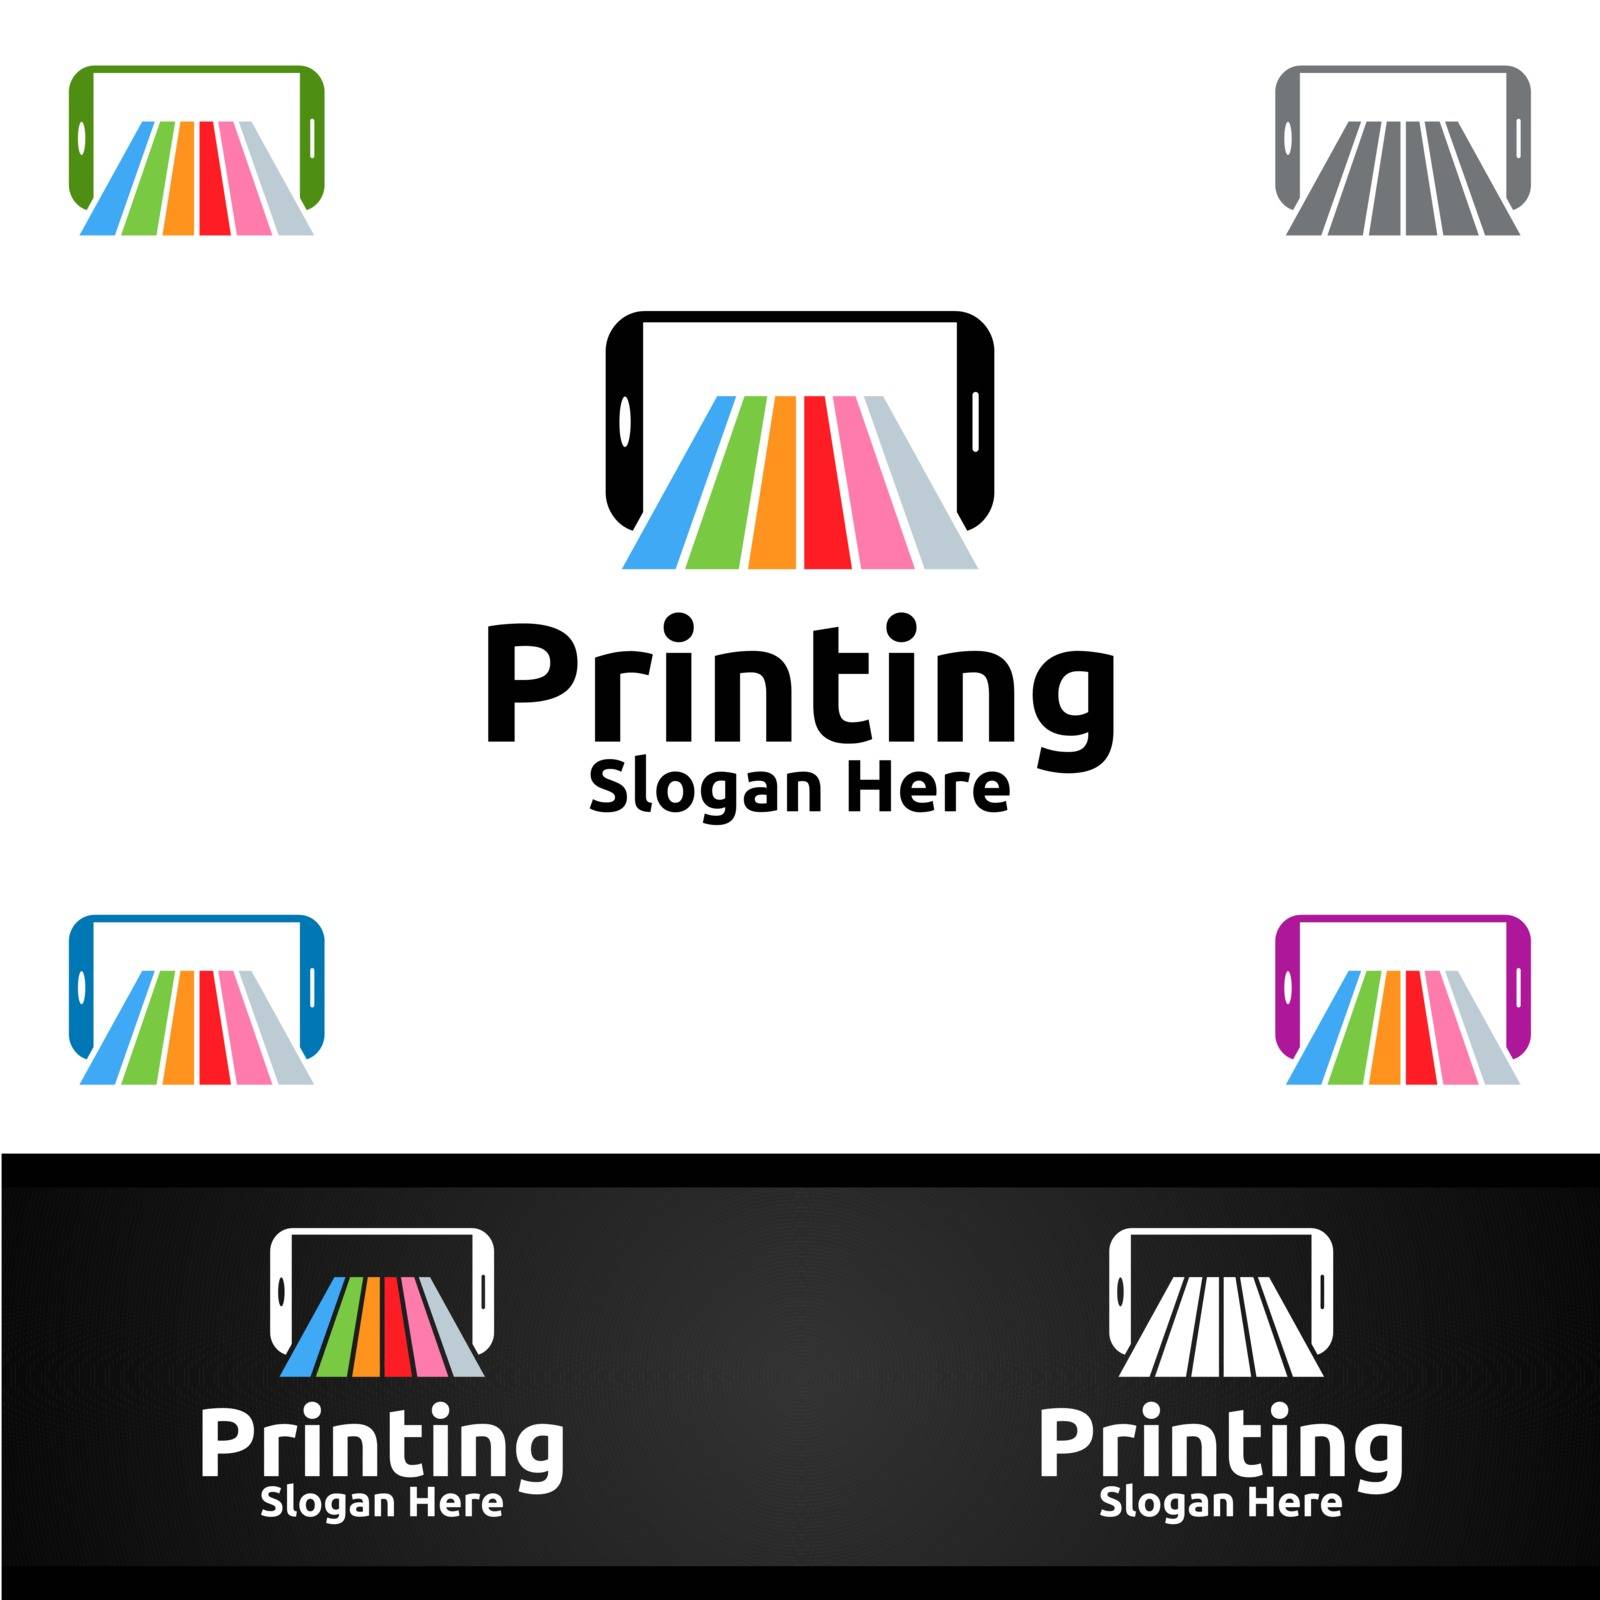 Mobile Printing Company Vector Logo Design for Media, Retail, Advertising, Newspaper or Book Concept